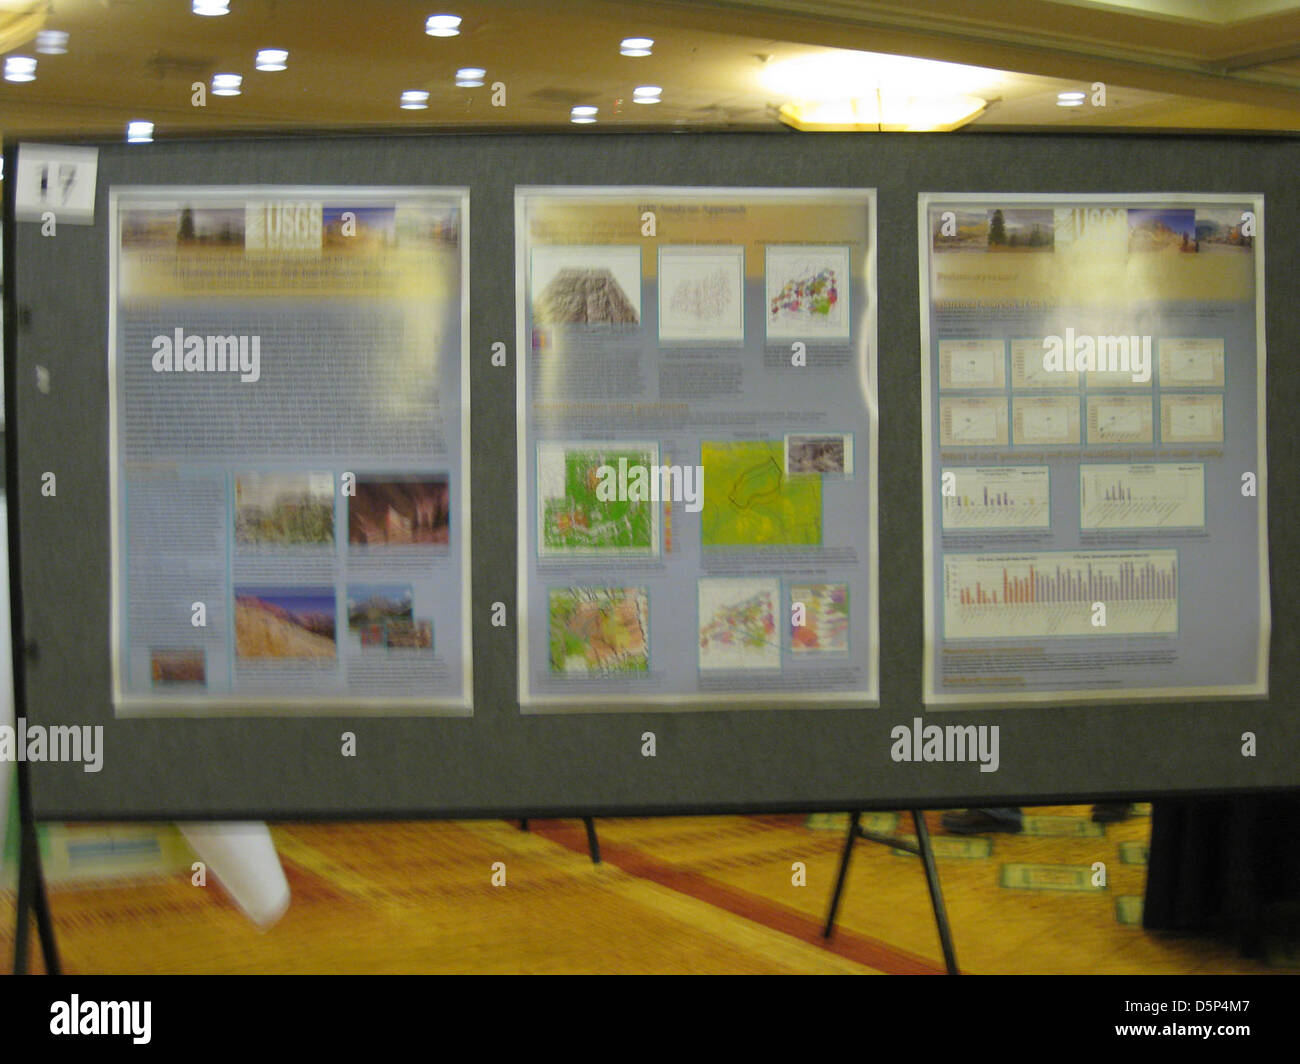 The conference geological map mapping national poster posters session survey tnm topographic us users usgs winning Stock Photo